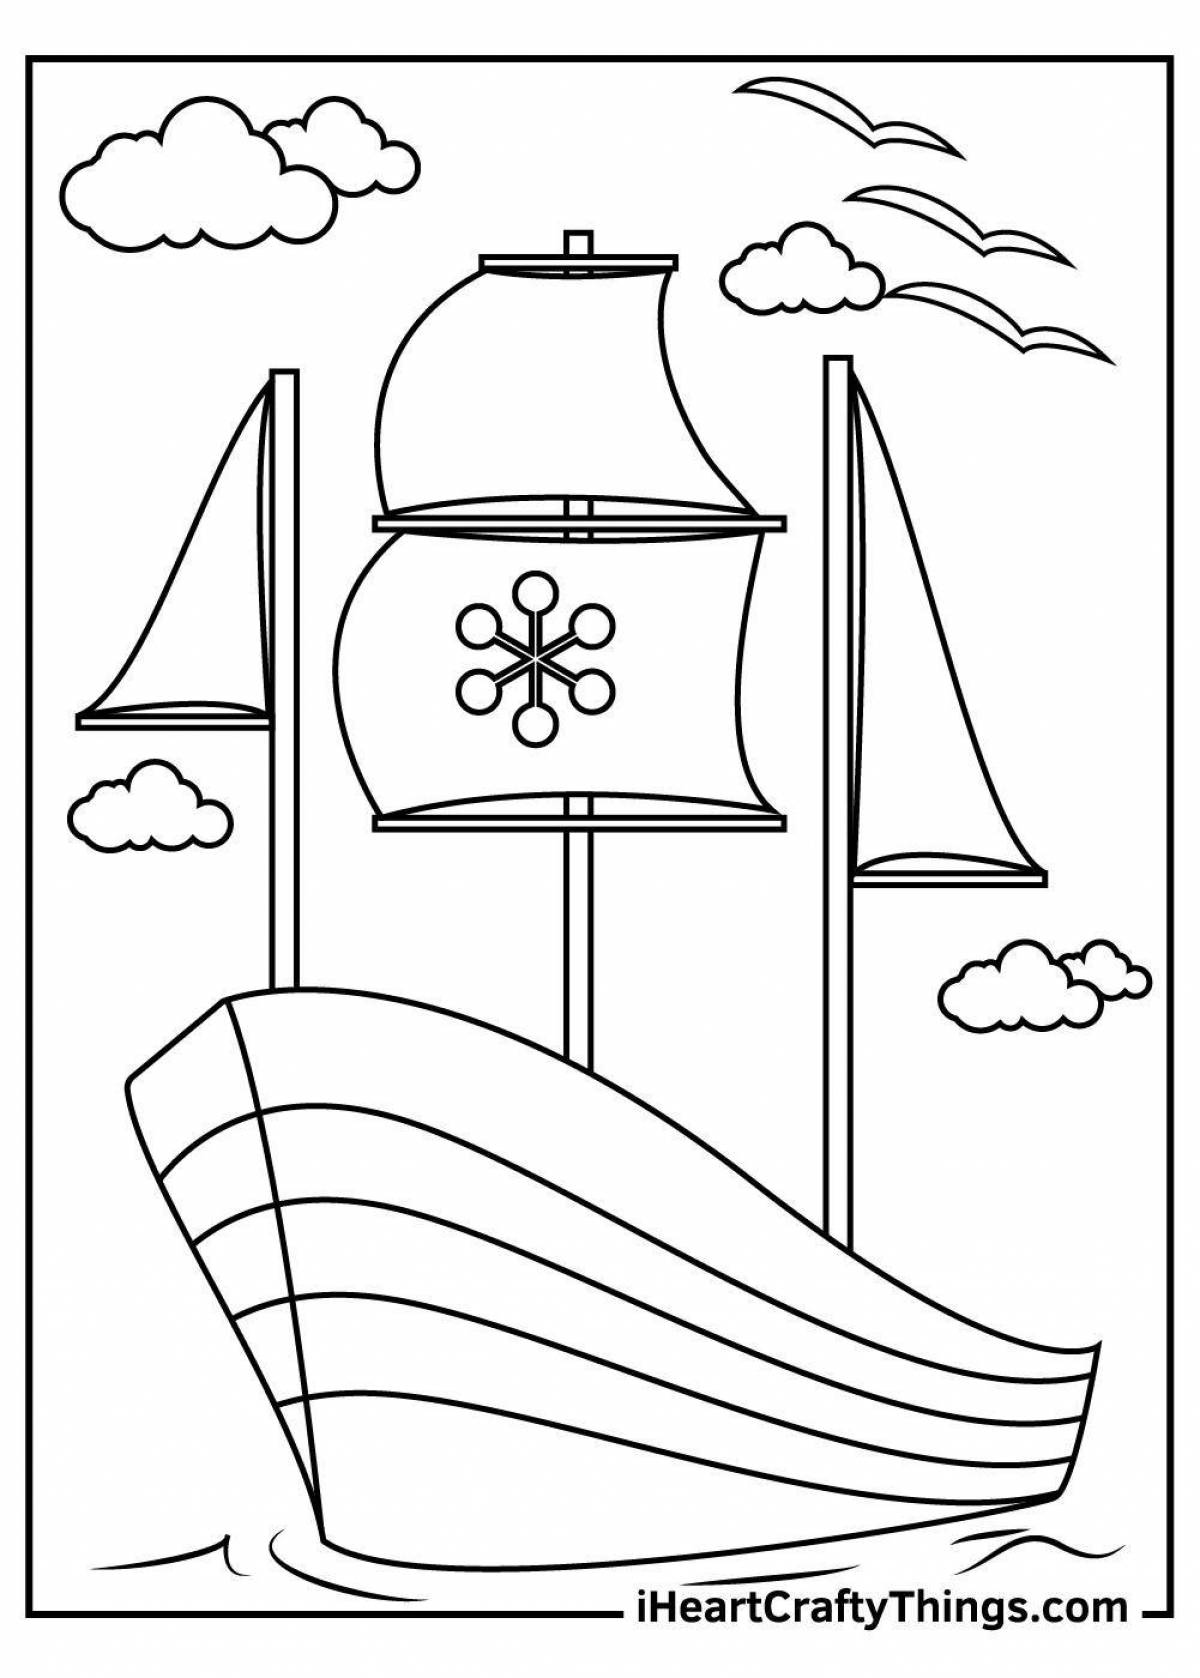 Colorful boat coloring book for 2-3 year olds